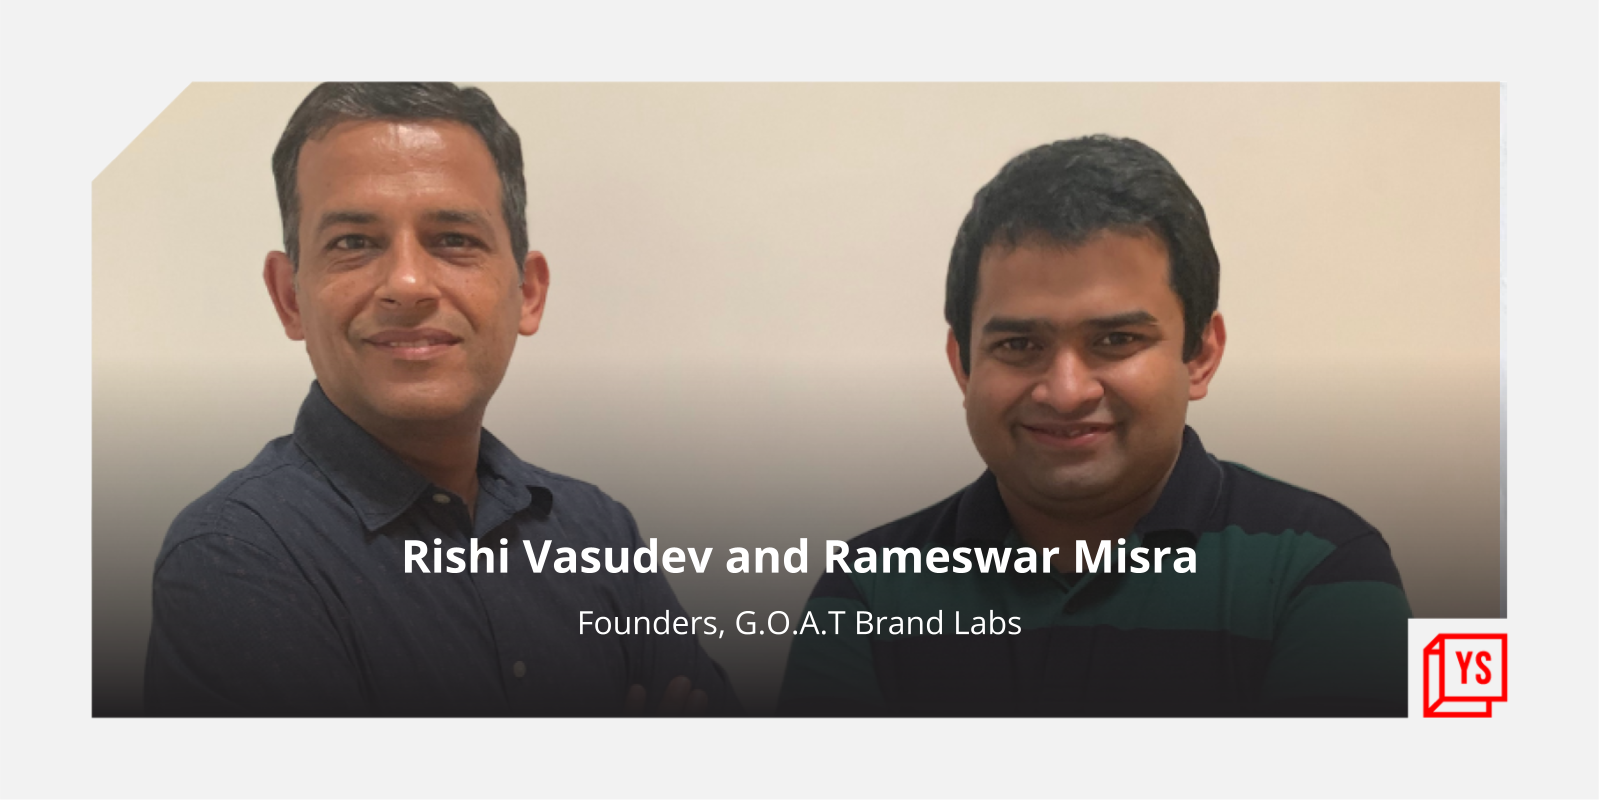 [Funding alert] D2C brand aggregator G.O.A.T raises $50M in Series A1 round

